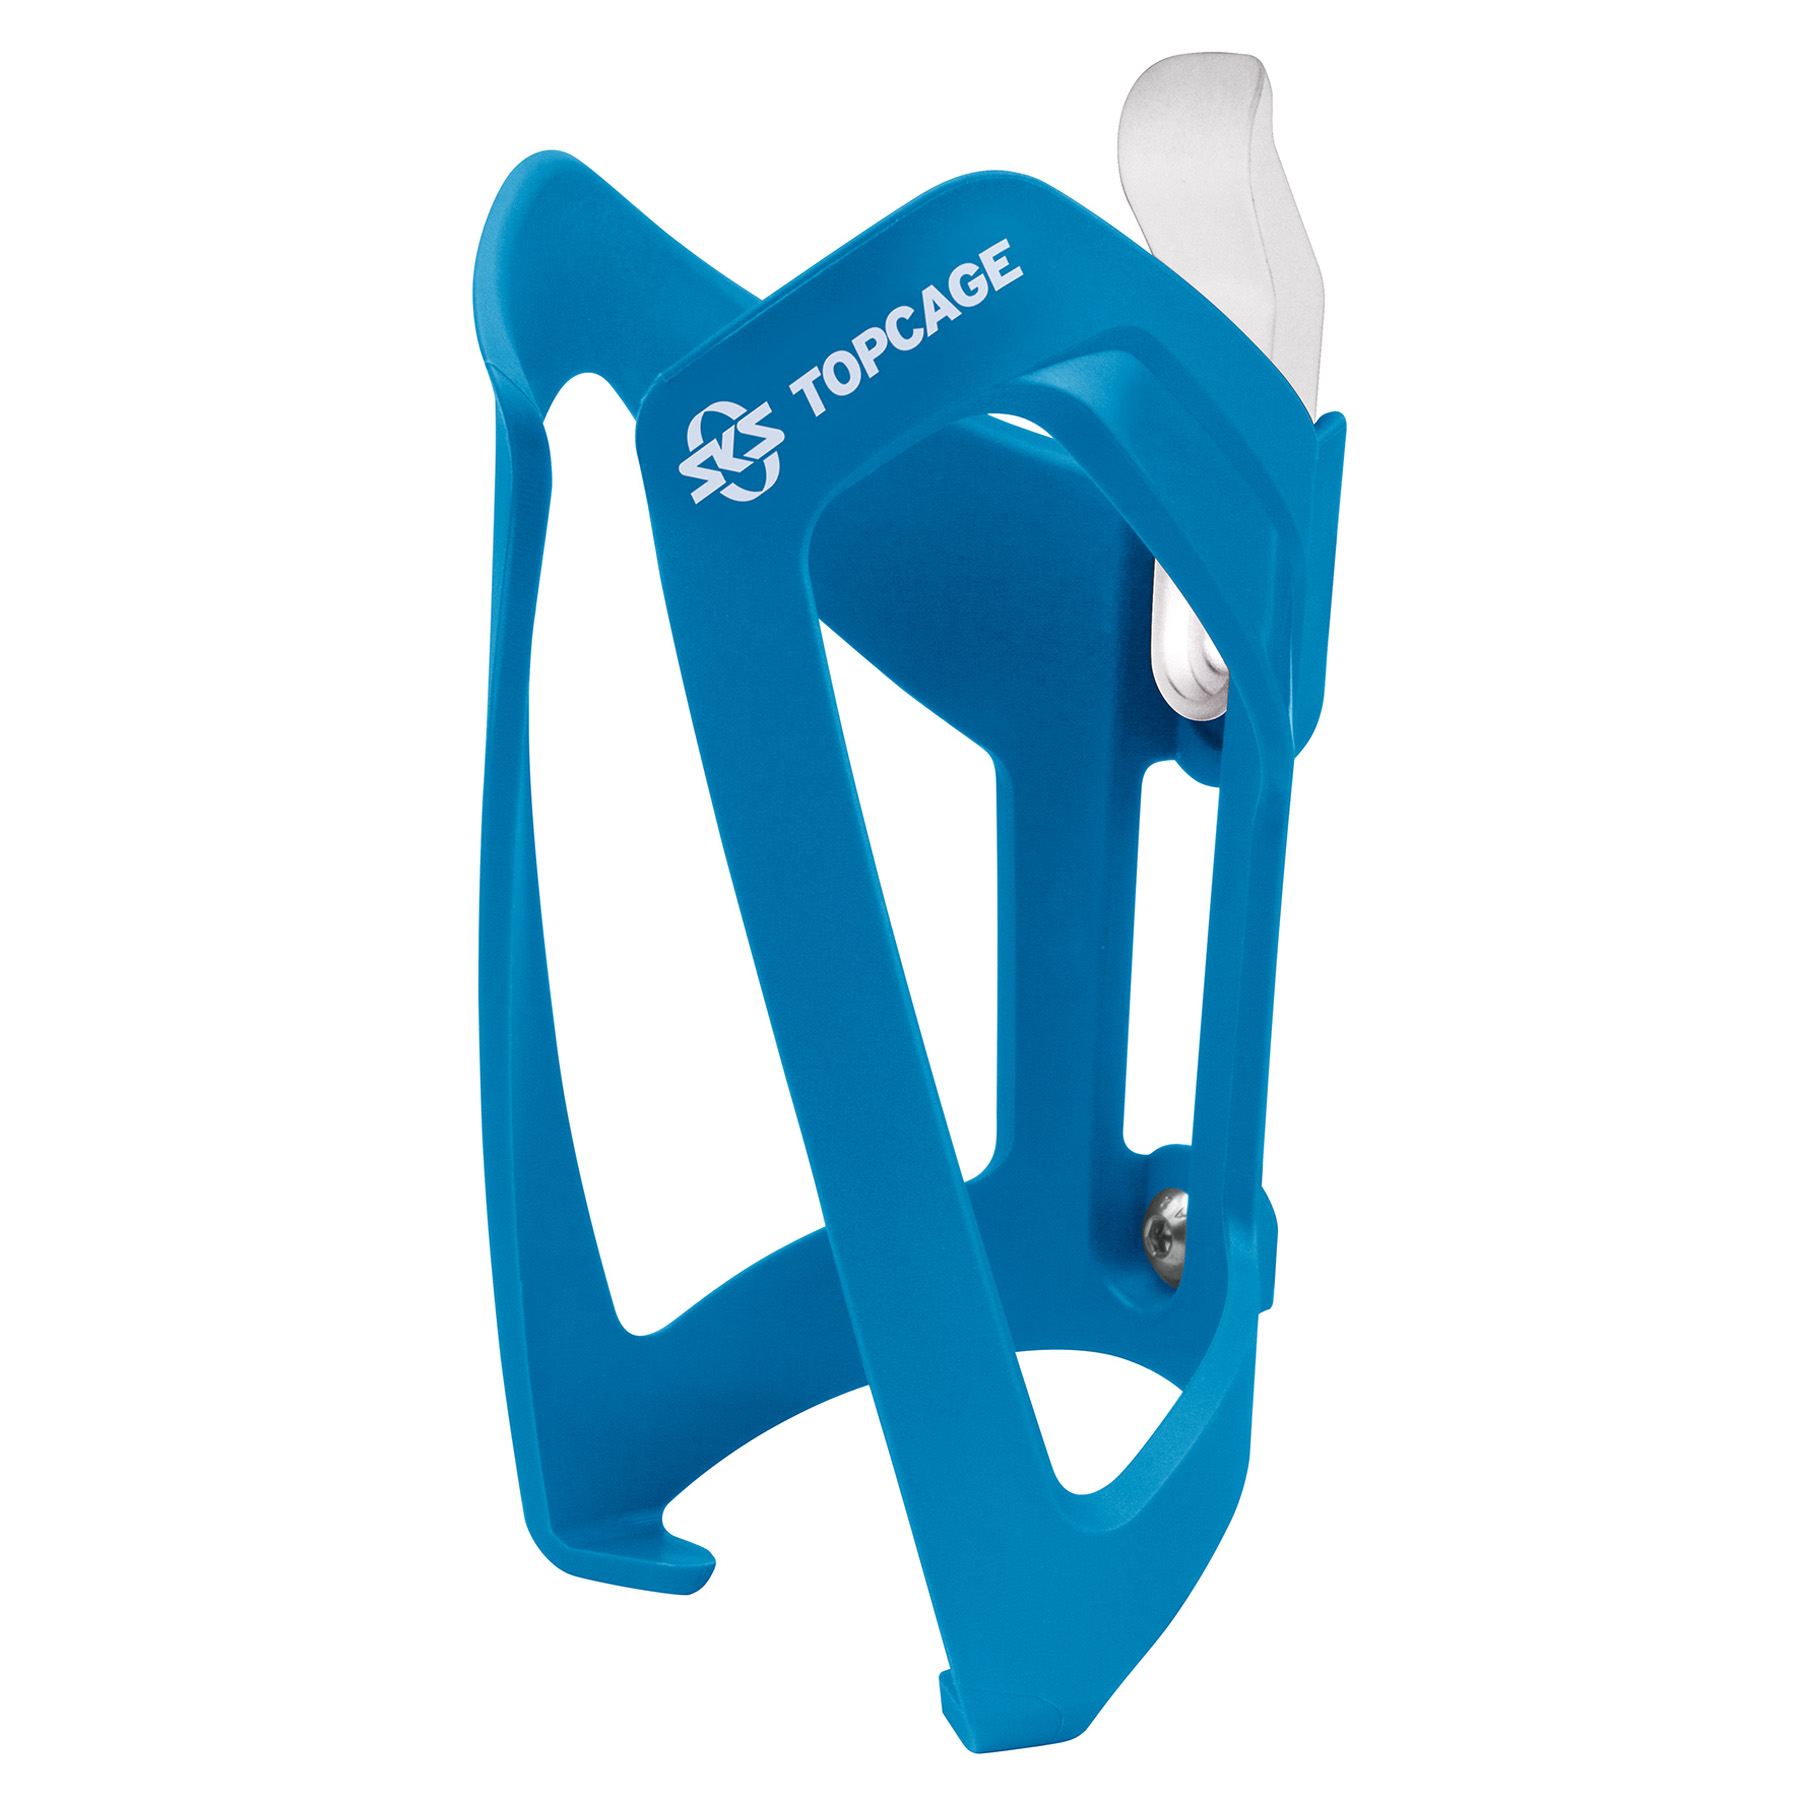 Picture of SKS Topcage Bottle Cage - blue